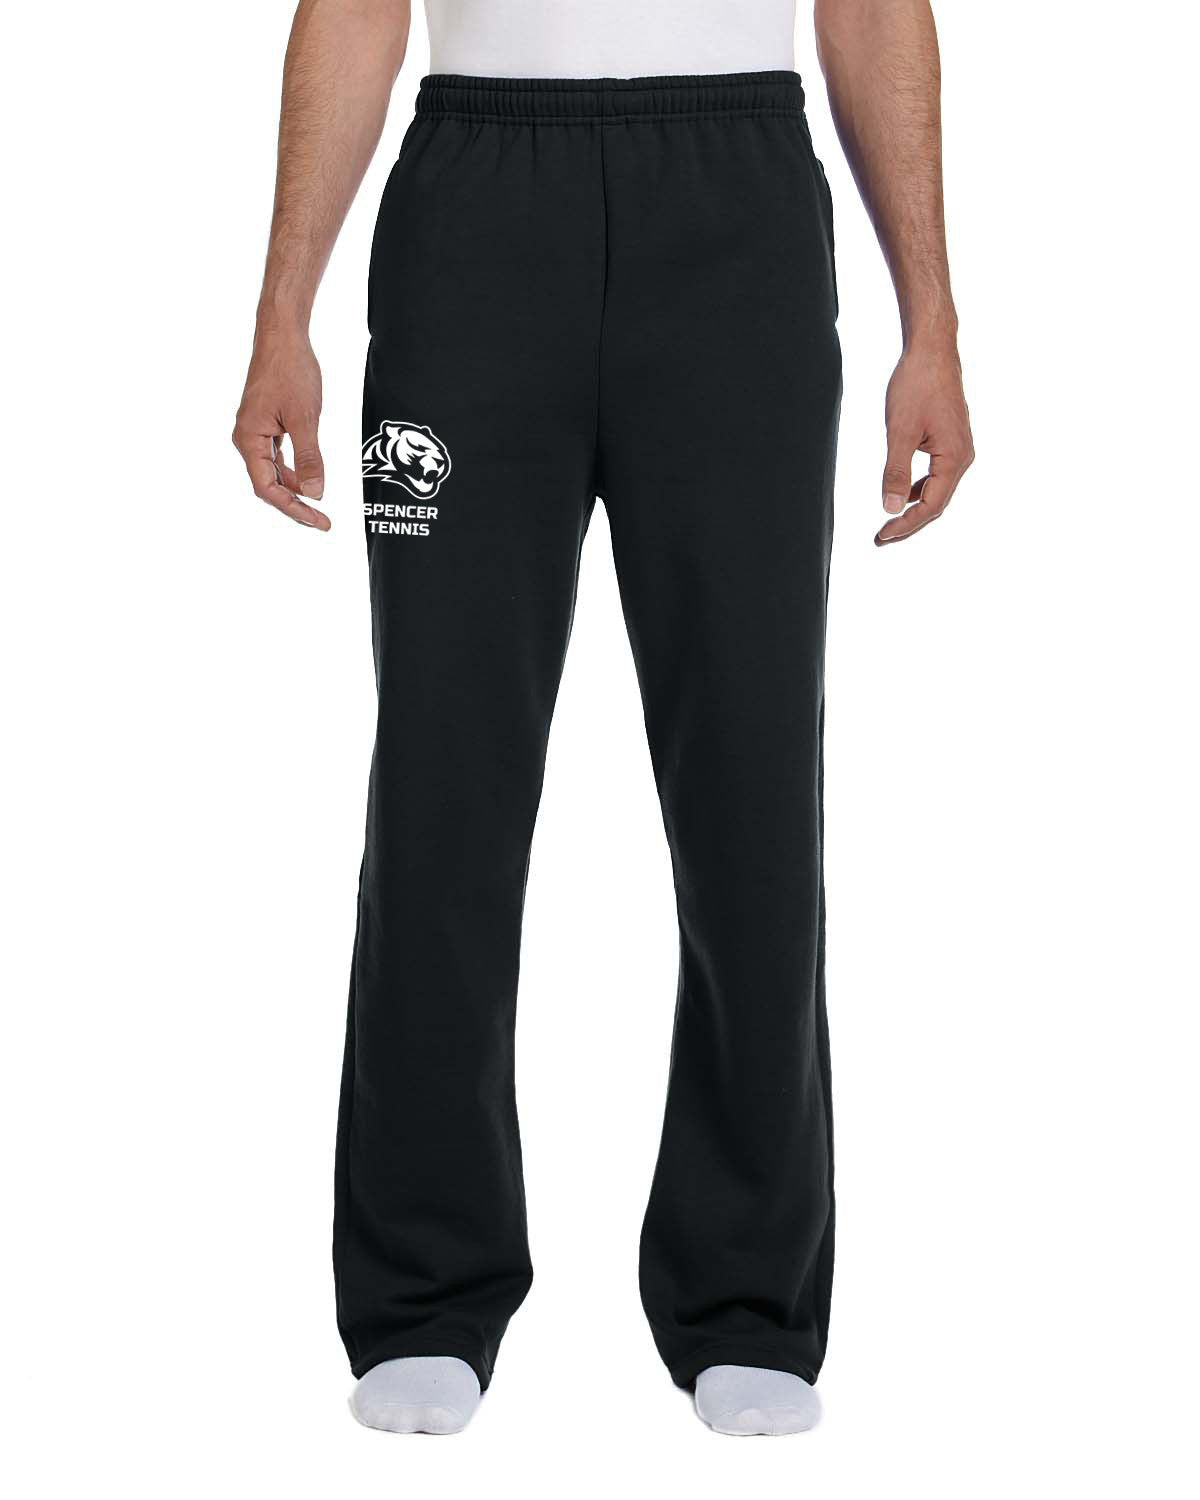 Adult Open Bottom Sweatpants with Pockets